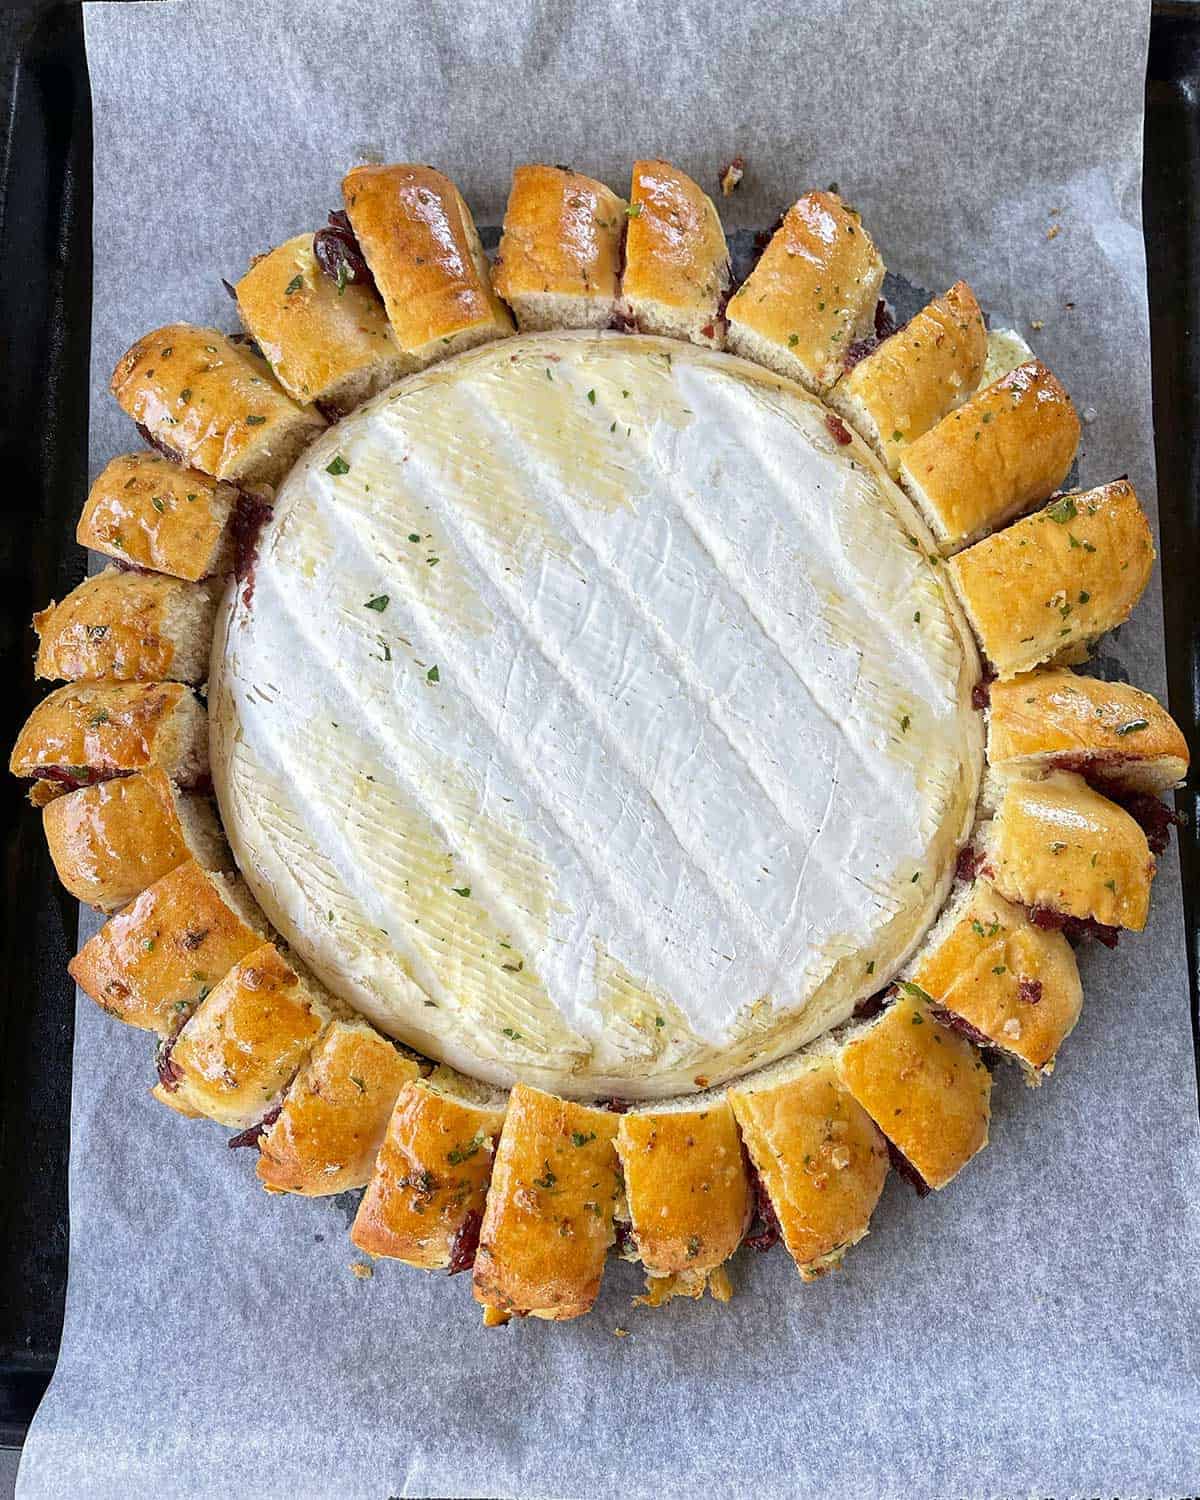 A cooked XL Brie Wreath on a lined baking tray.